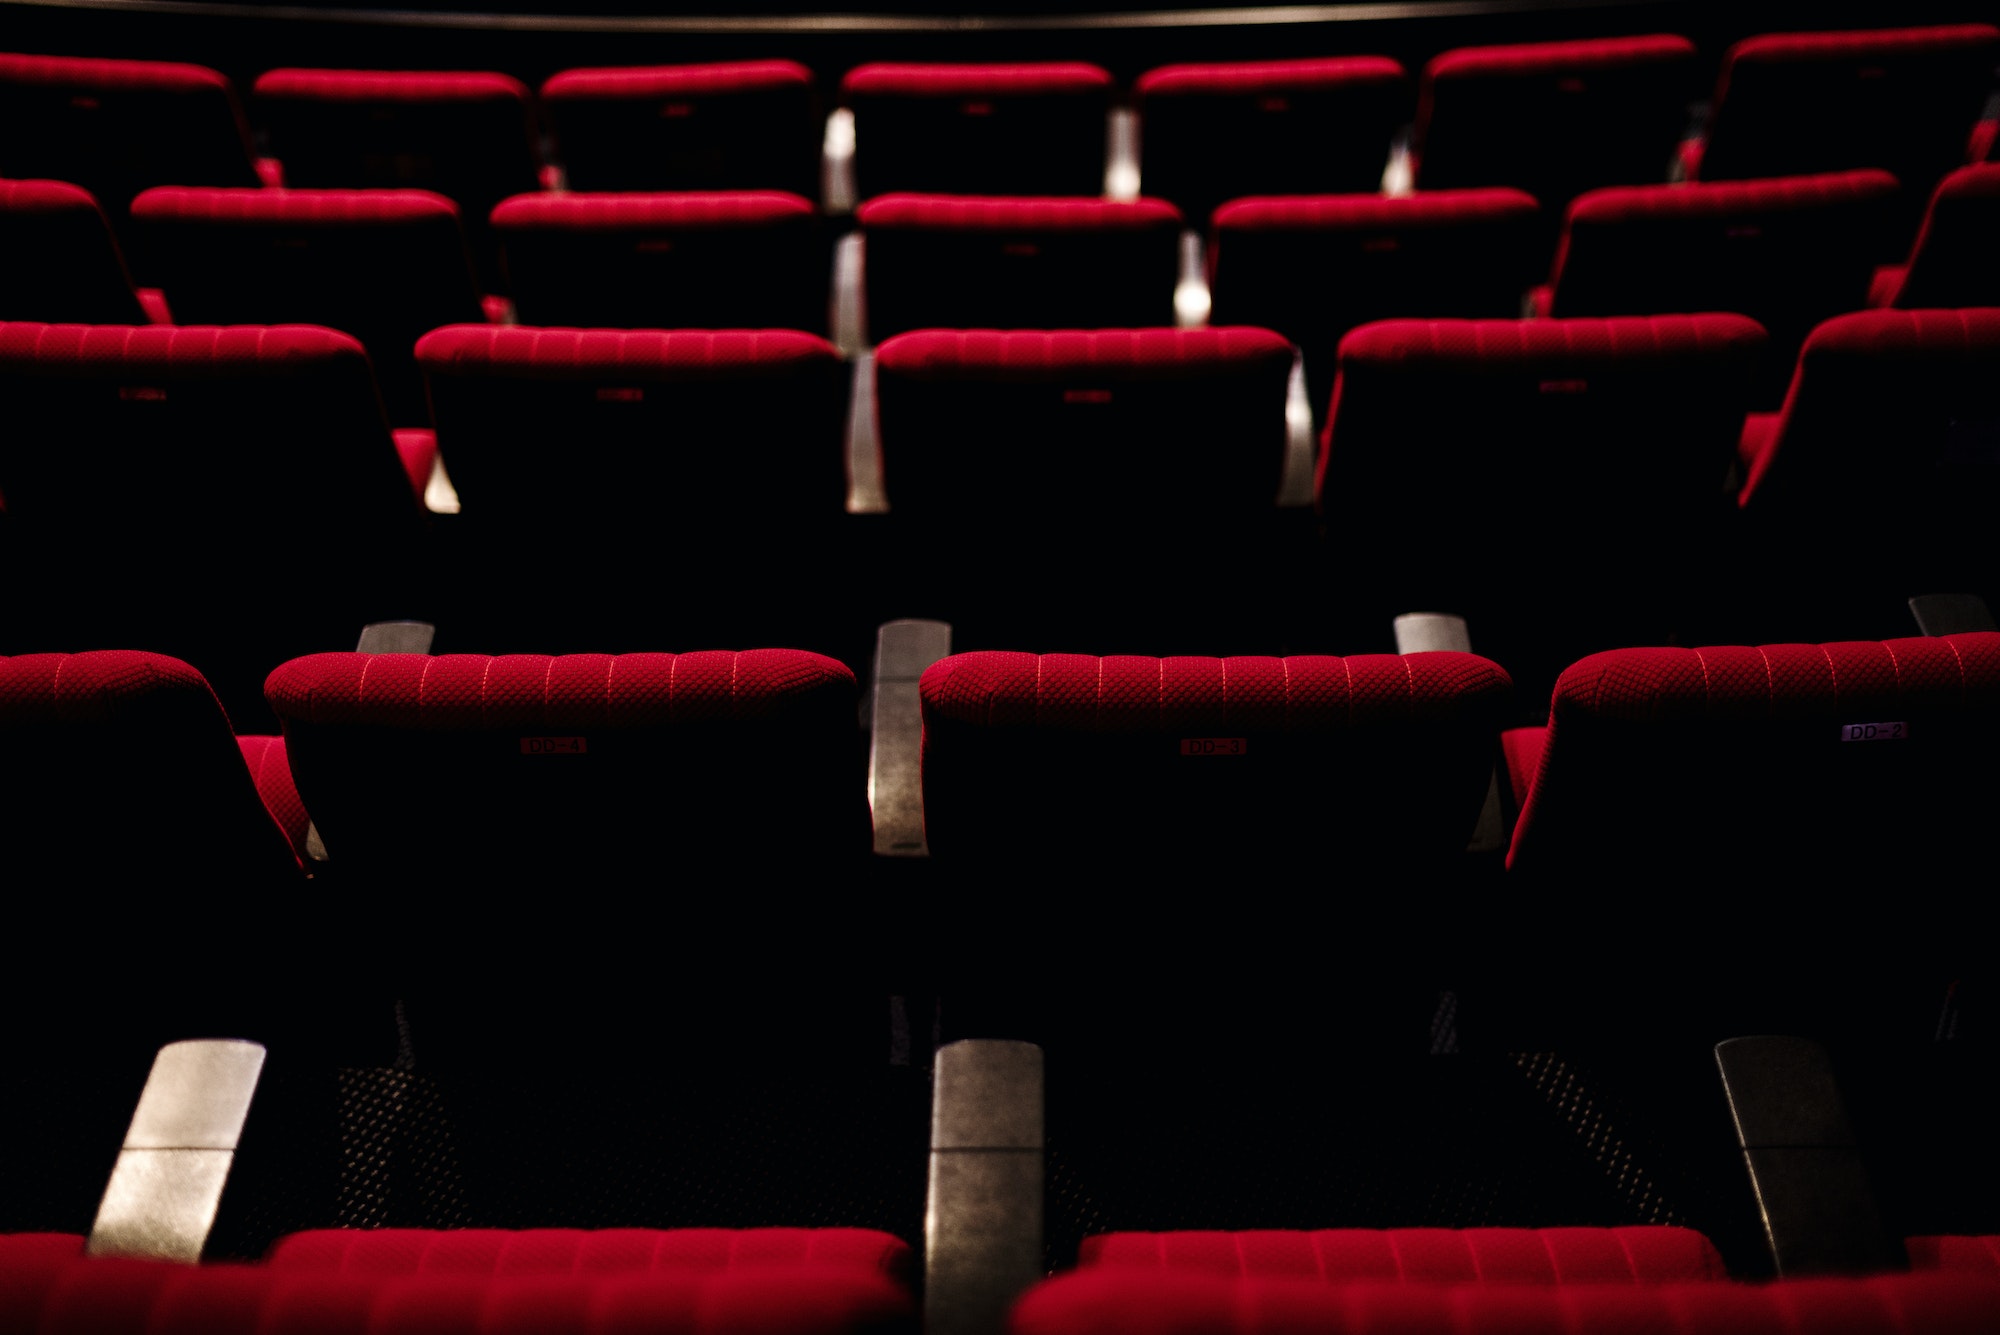 Rows of red seats in a theatre